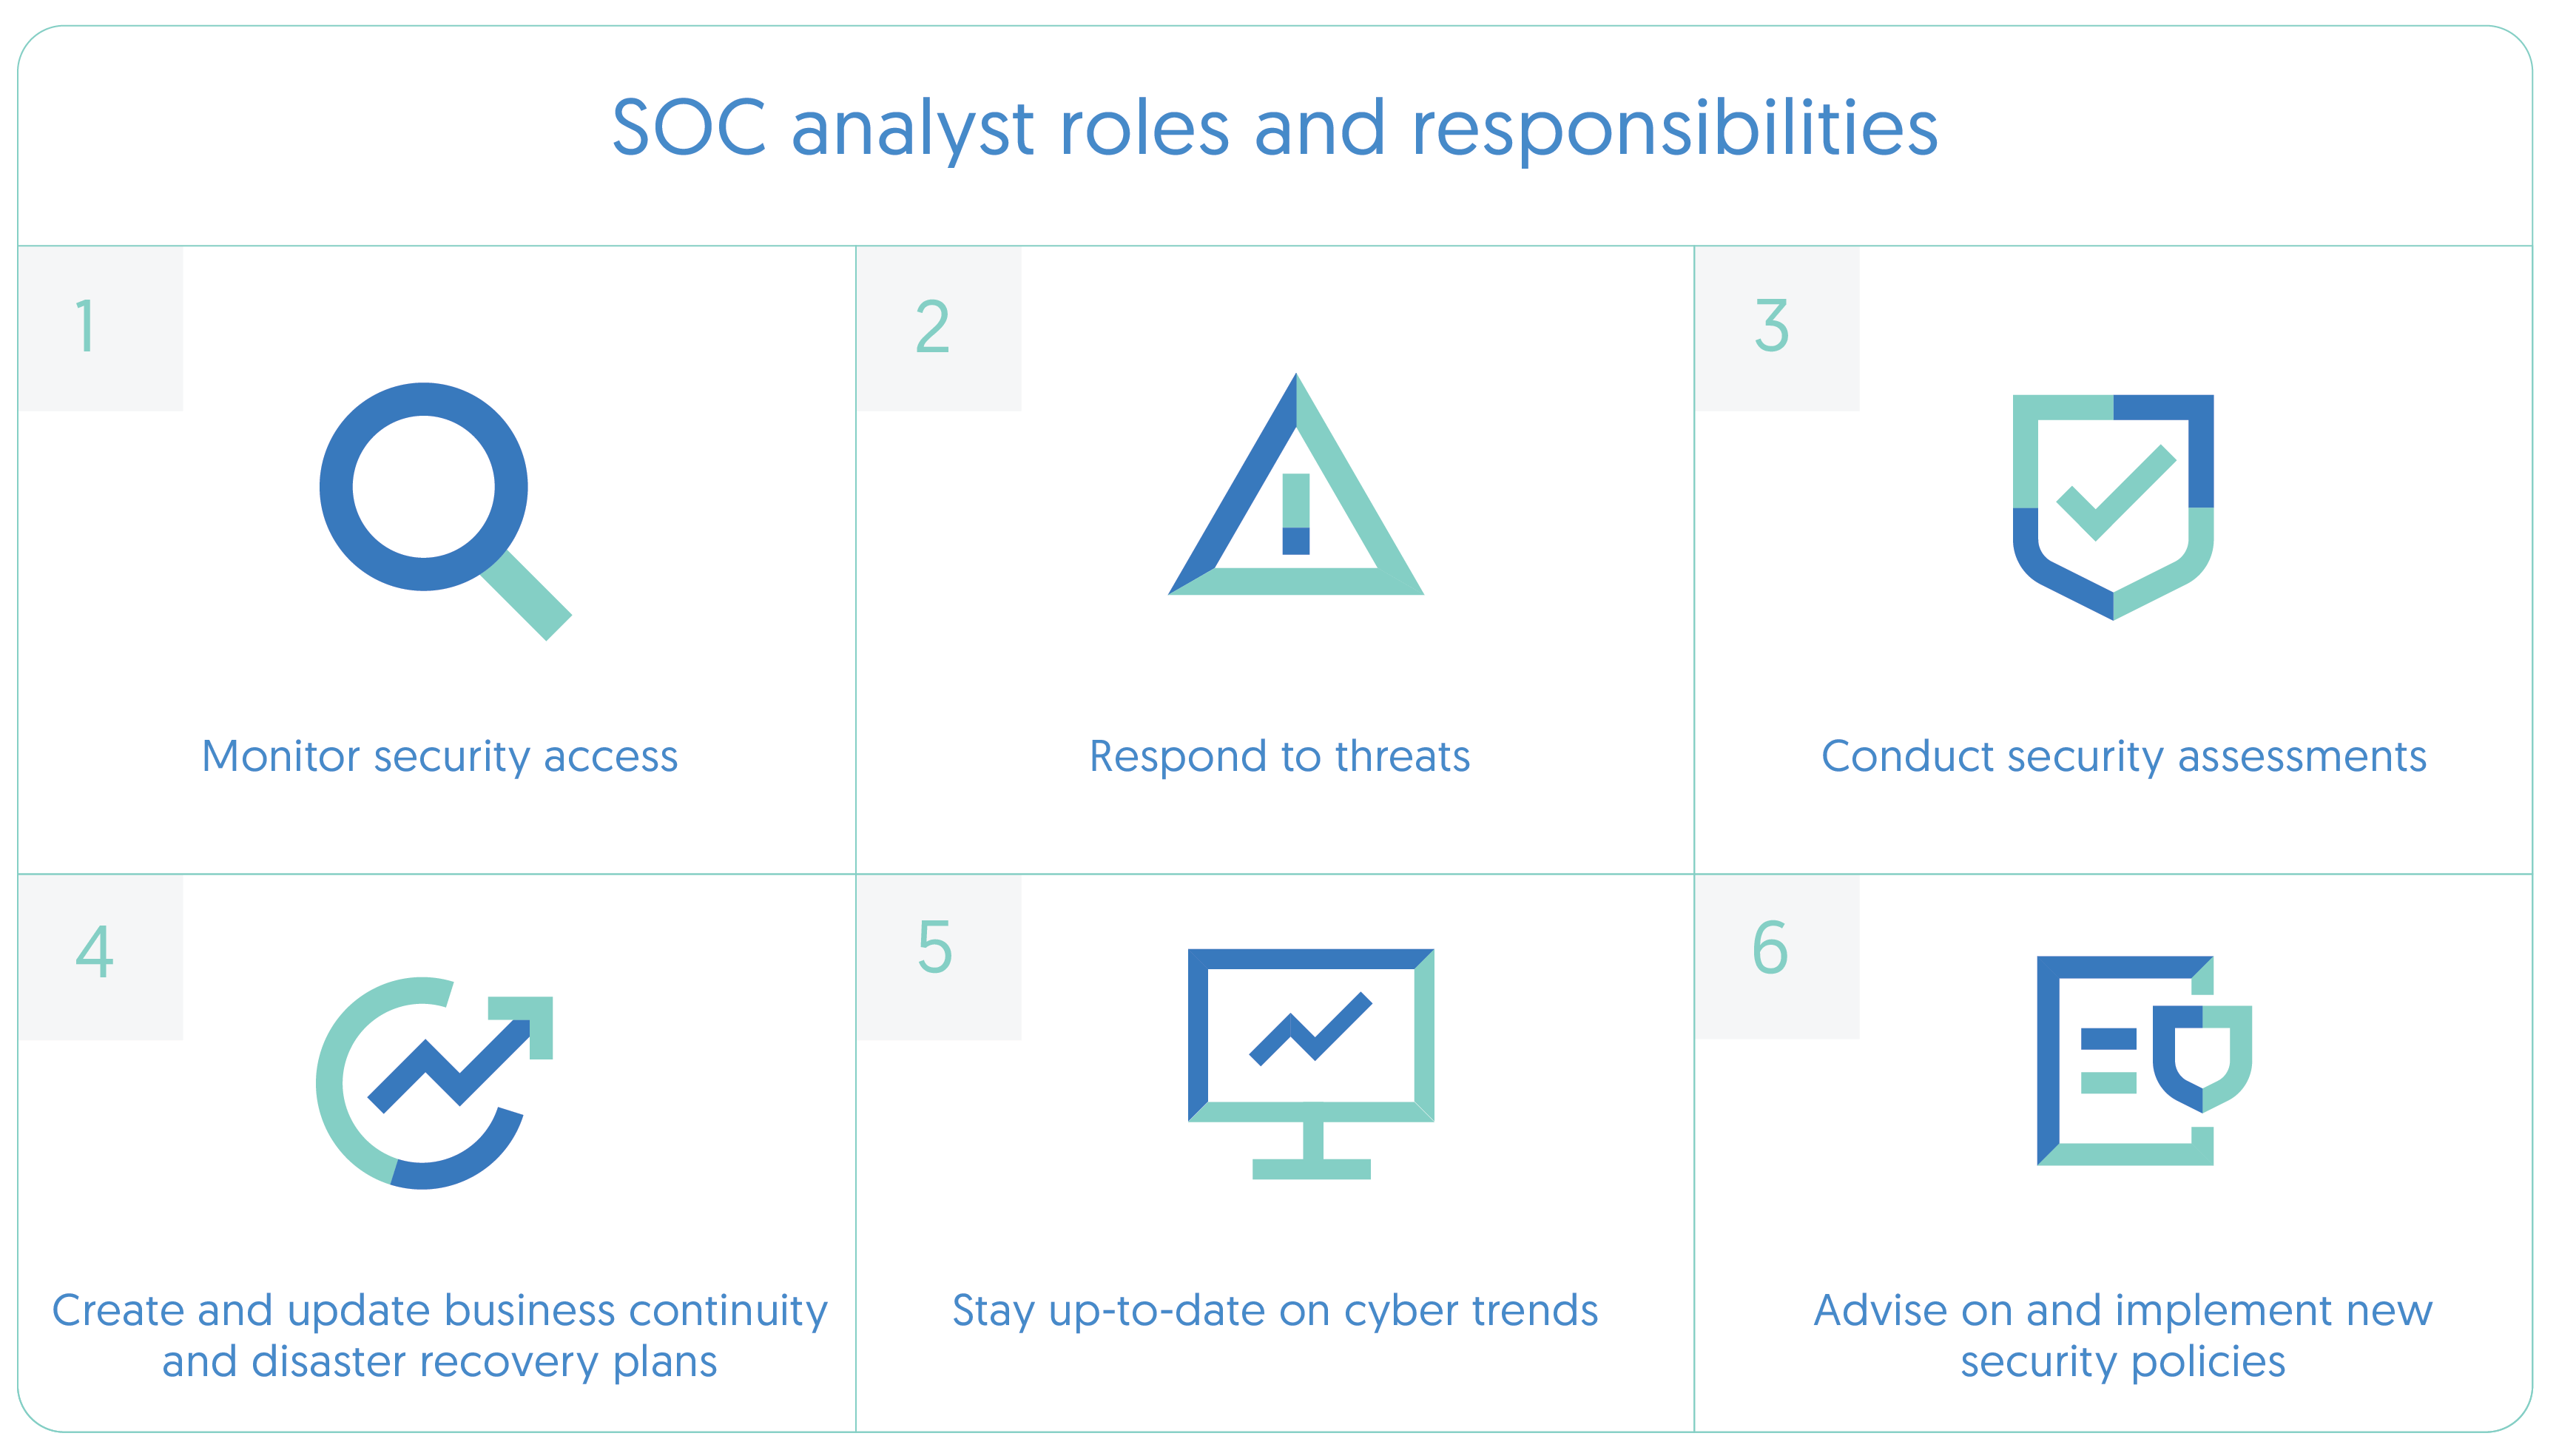 List of six SOC analyst roles and responsibilities